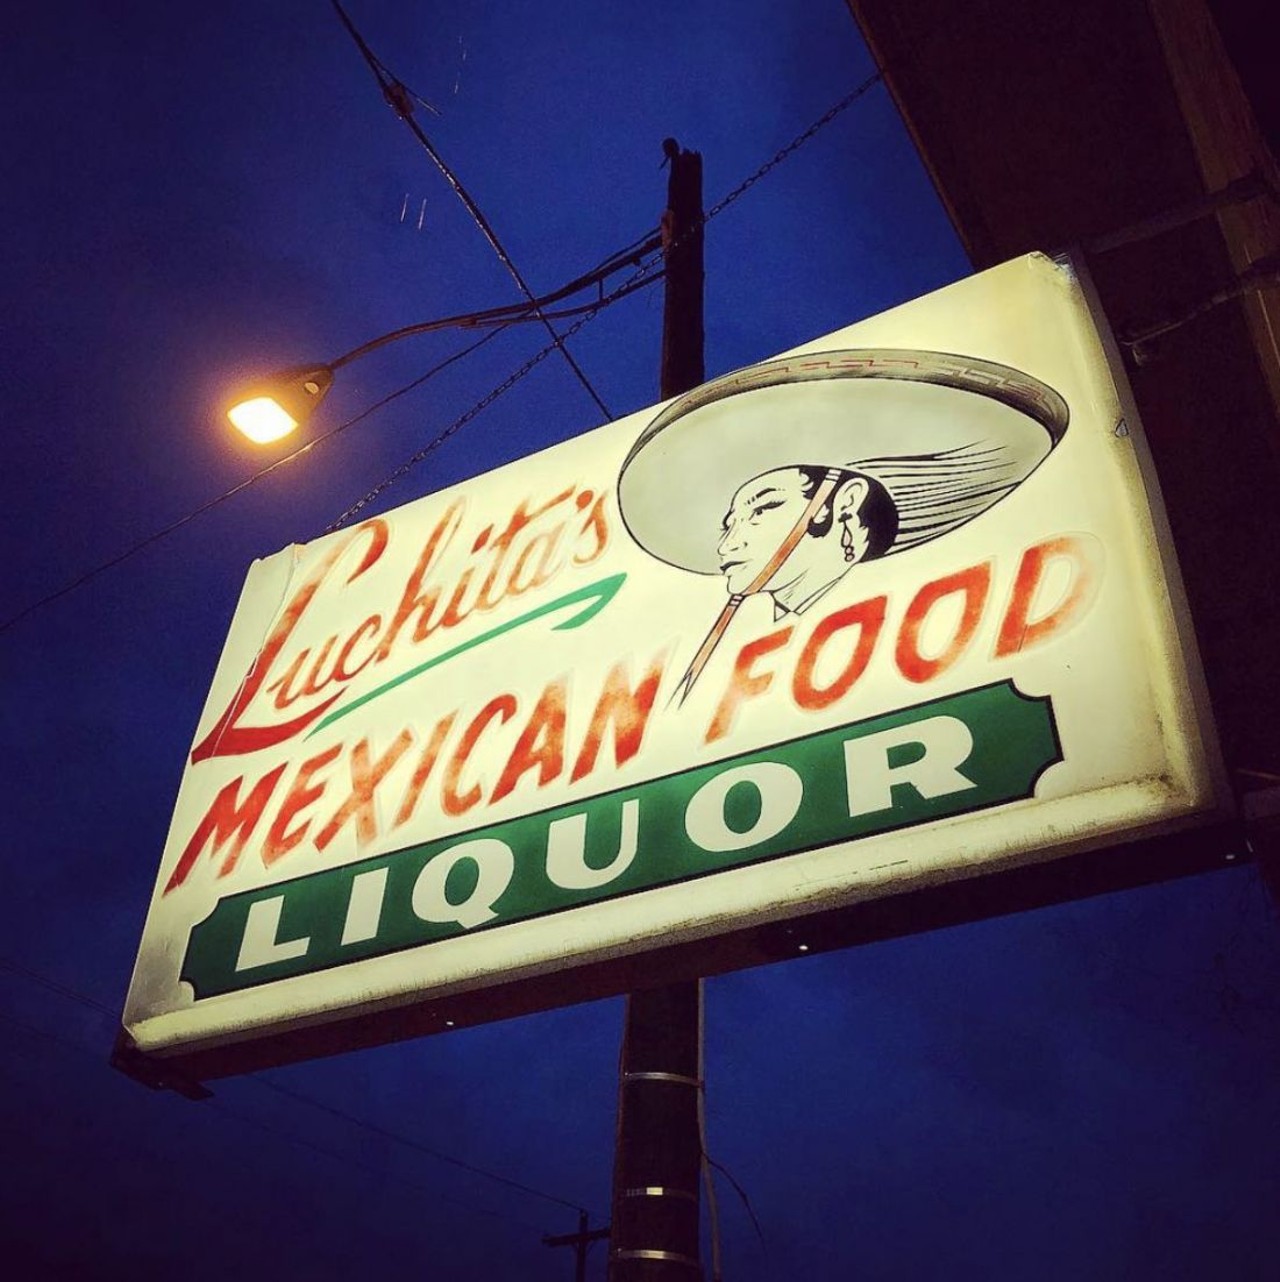  Luchita&#146;s
3456 West 117th St., Cleveland
One of the oldest Mexican joints in town, this place has been serving up food from south of the border since 1982. Their carne asada tacos are otherworldly.
Photo via @ScottBeNimble/Instagram